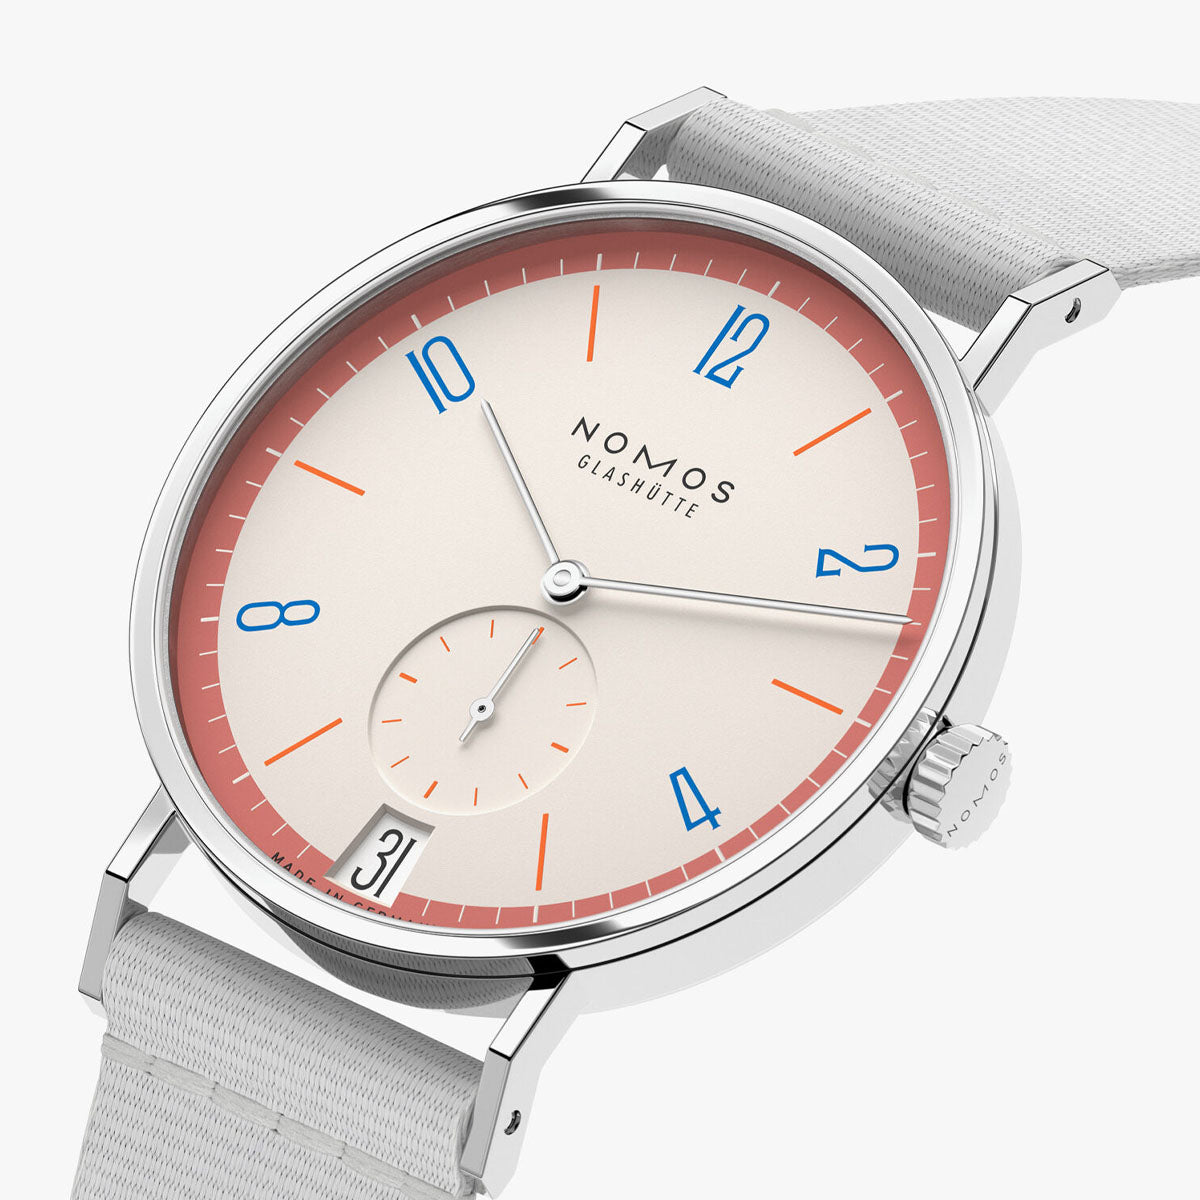 Tangente 38mm 'Love' Limited Edition Watch